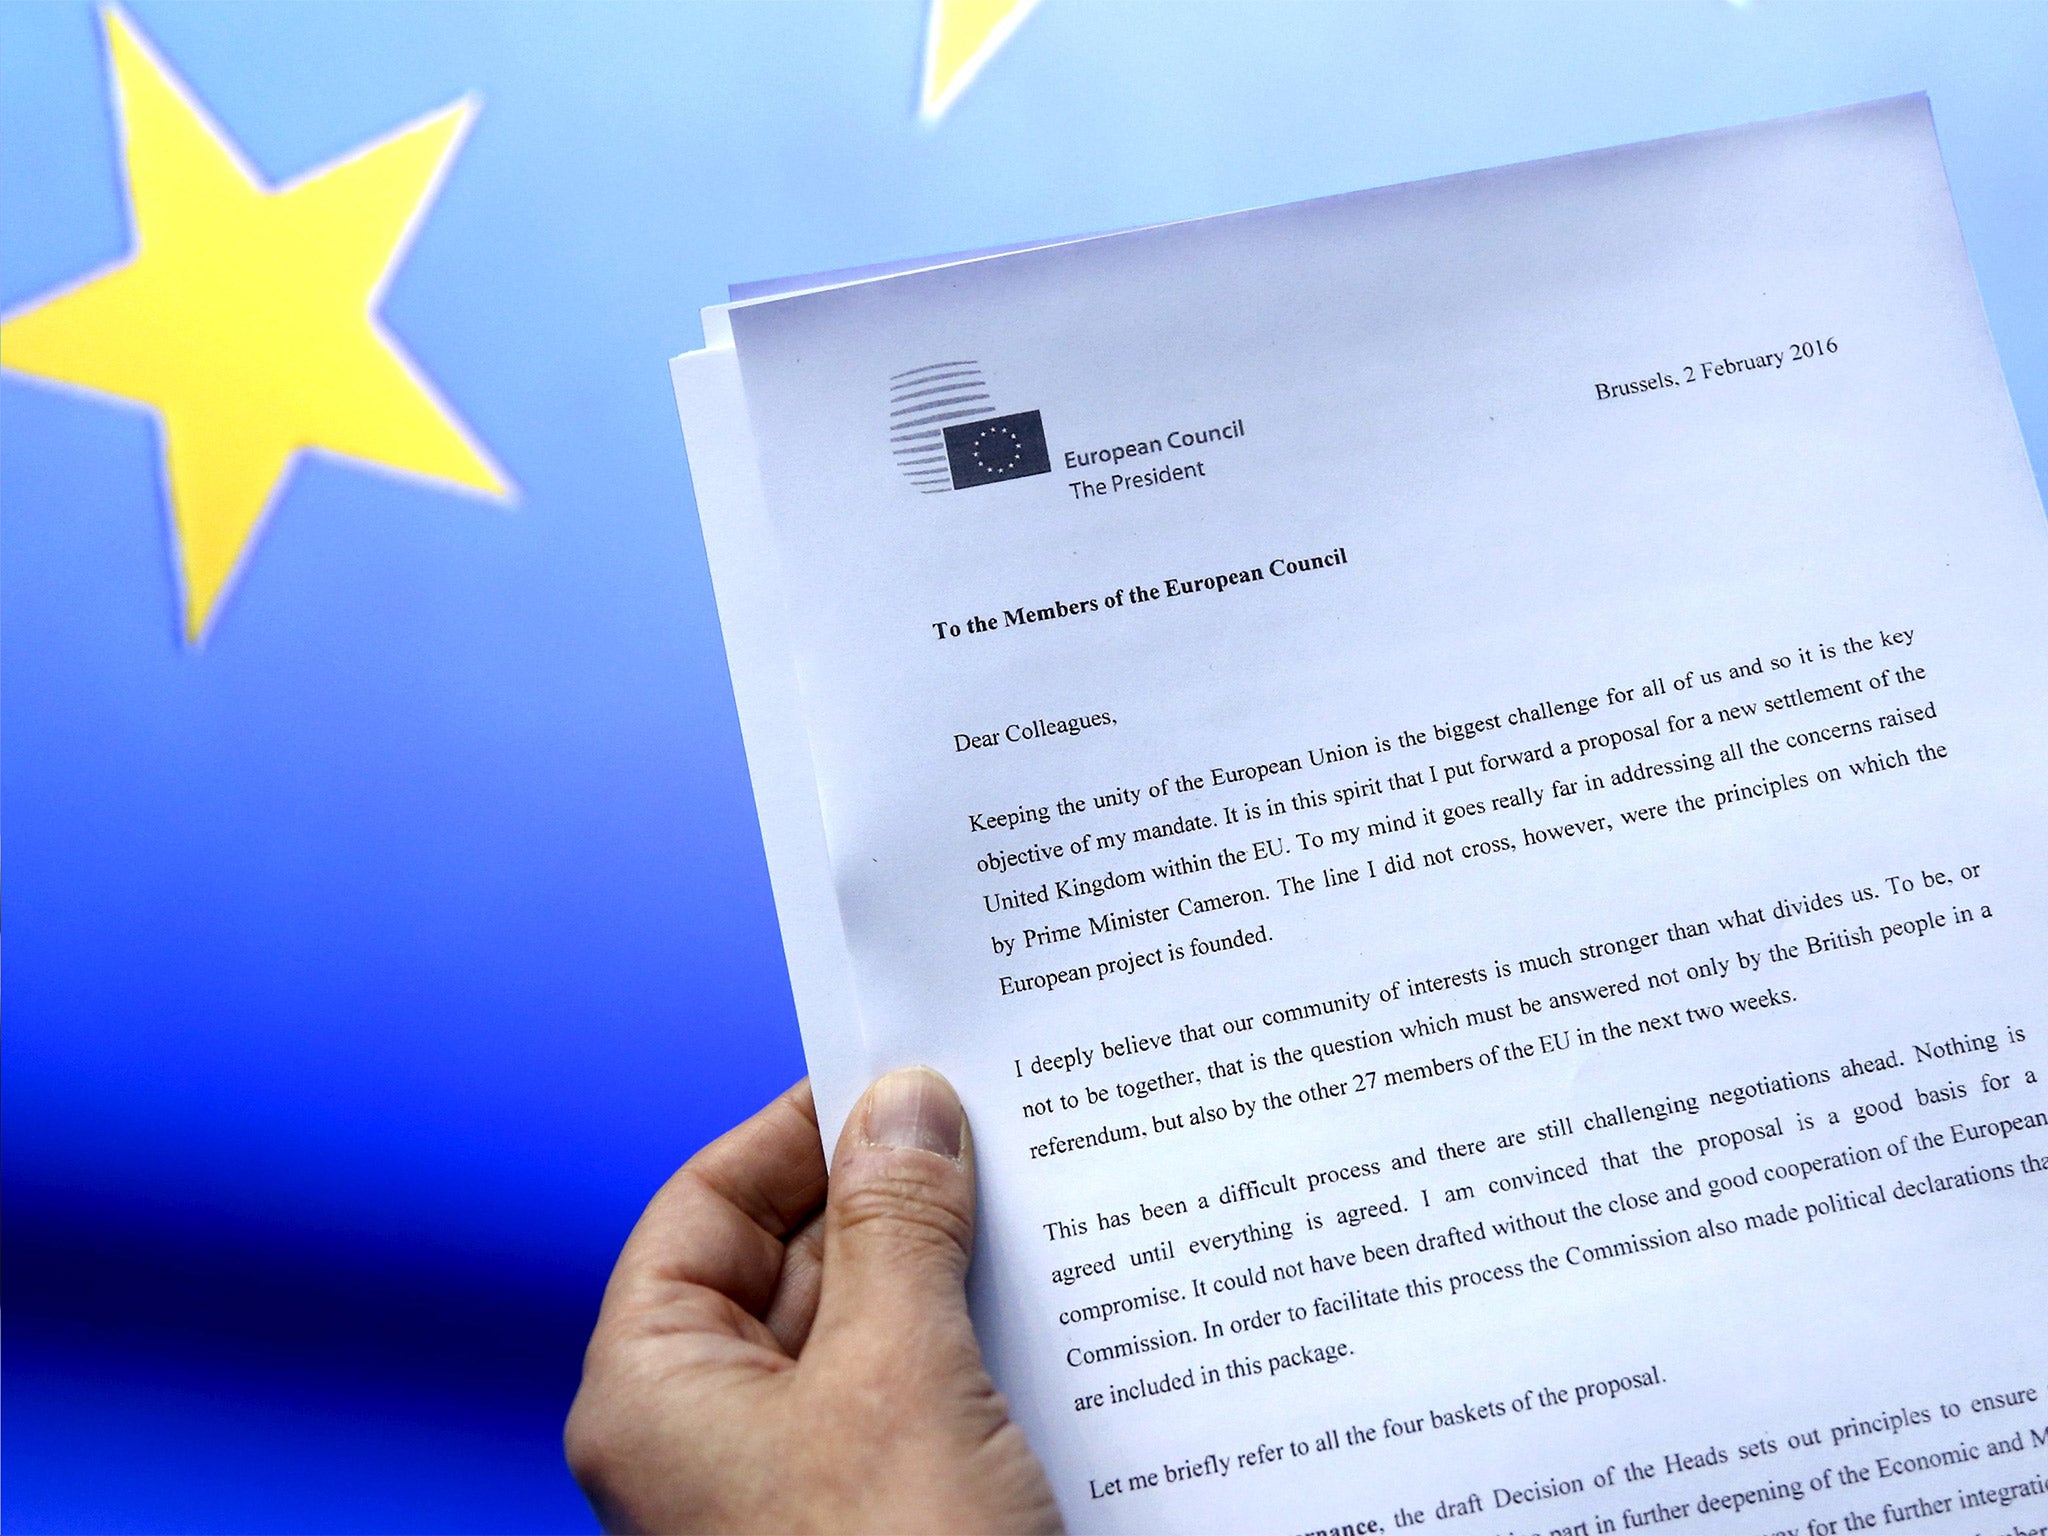 A letter sent by European Council President Donald Tusk to European Union leaders explains some elements of the draft deal agreed with David Cameron